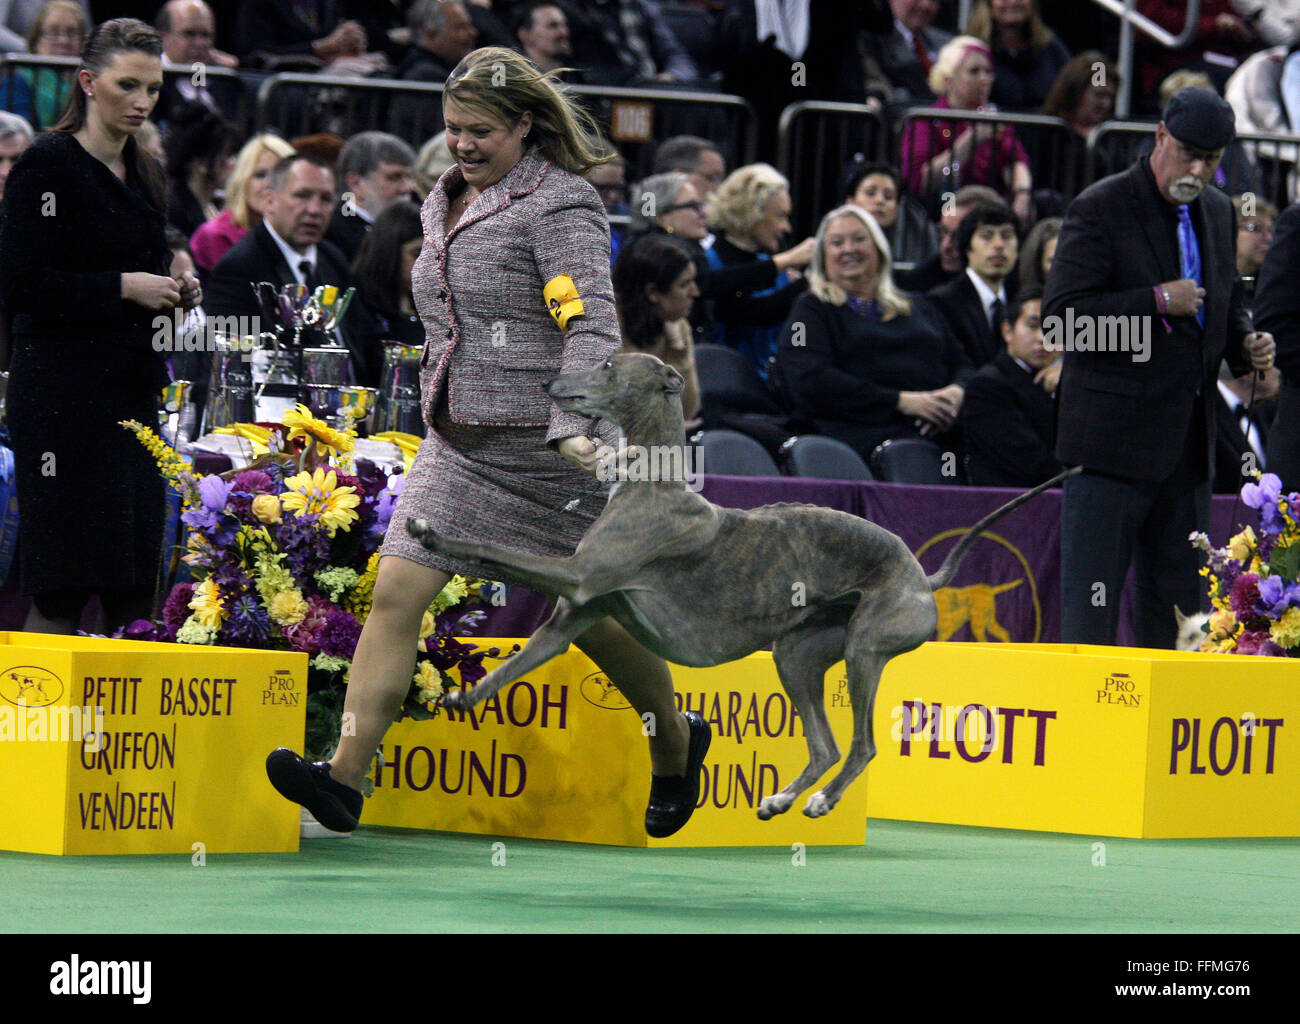 New York, USA. 15th February, 2016. GCH Grandcru Giaconda CGC, a Greyhound in the Hound Group Competition during the Hound Group competition at the Westminster Dog Show at Madison Square Garden, Monday February 15, 2016. Credit:  Adam Stoltman/Alamy Live News Stock Photo